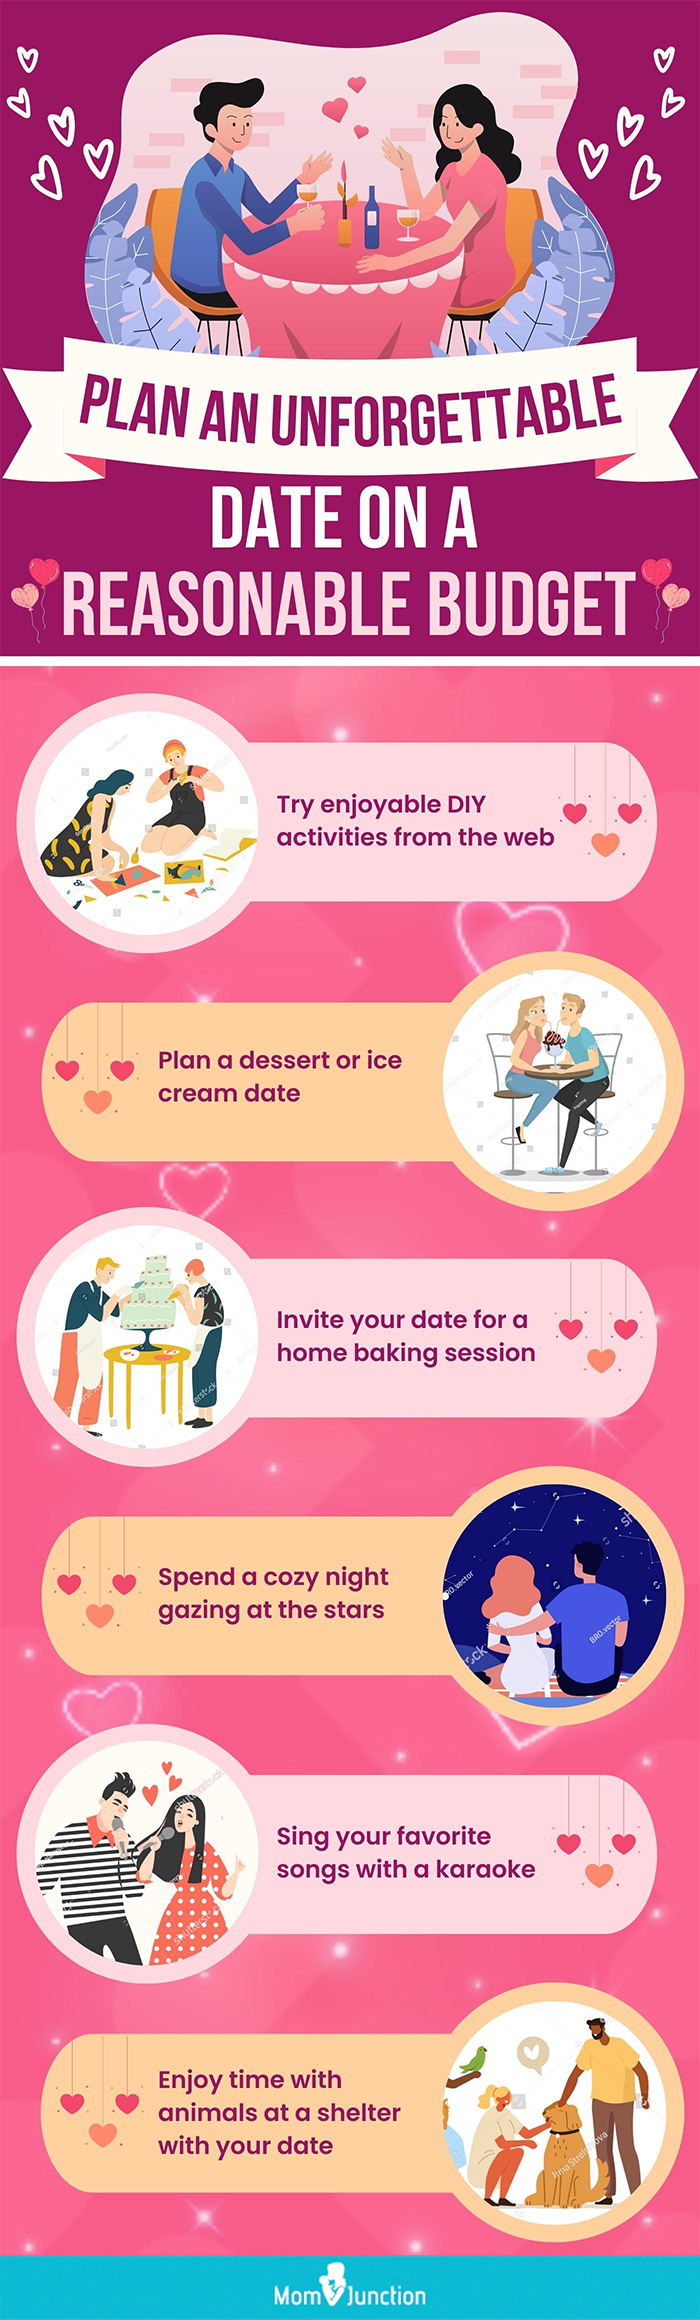 plan an unforgettable date reasonable budget (infographic)